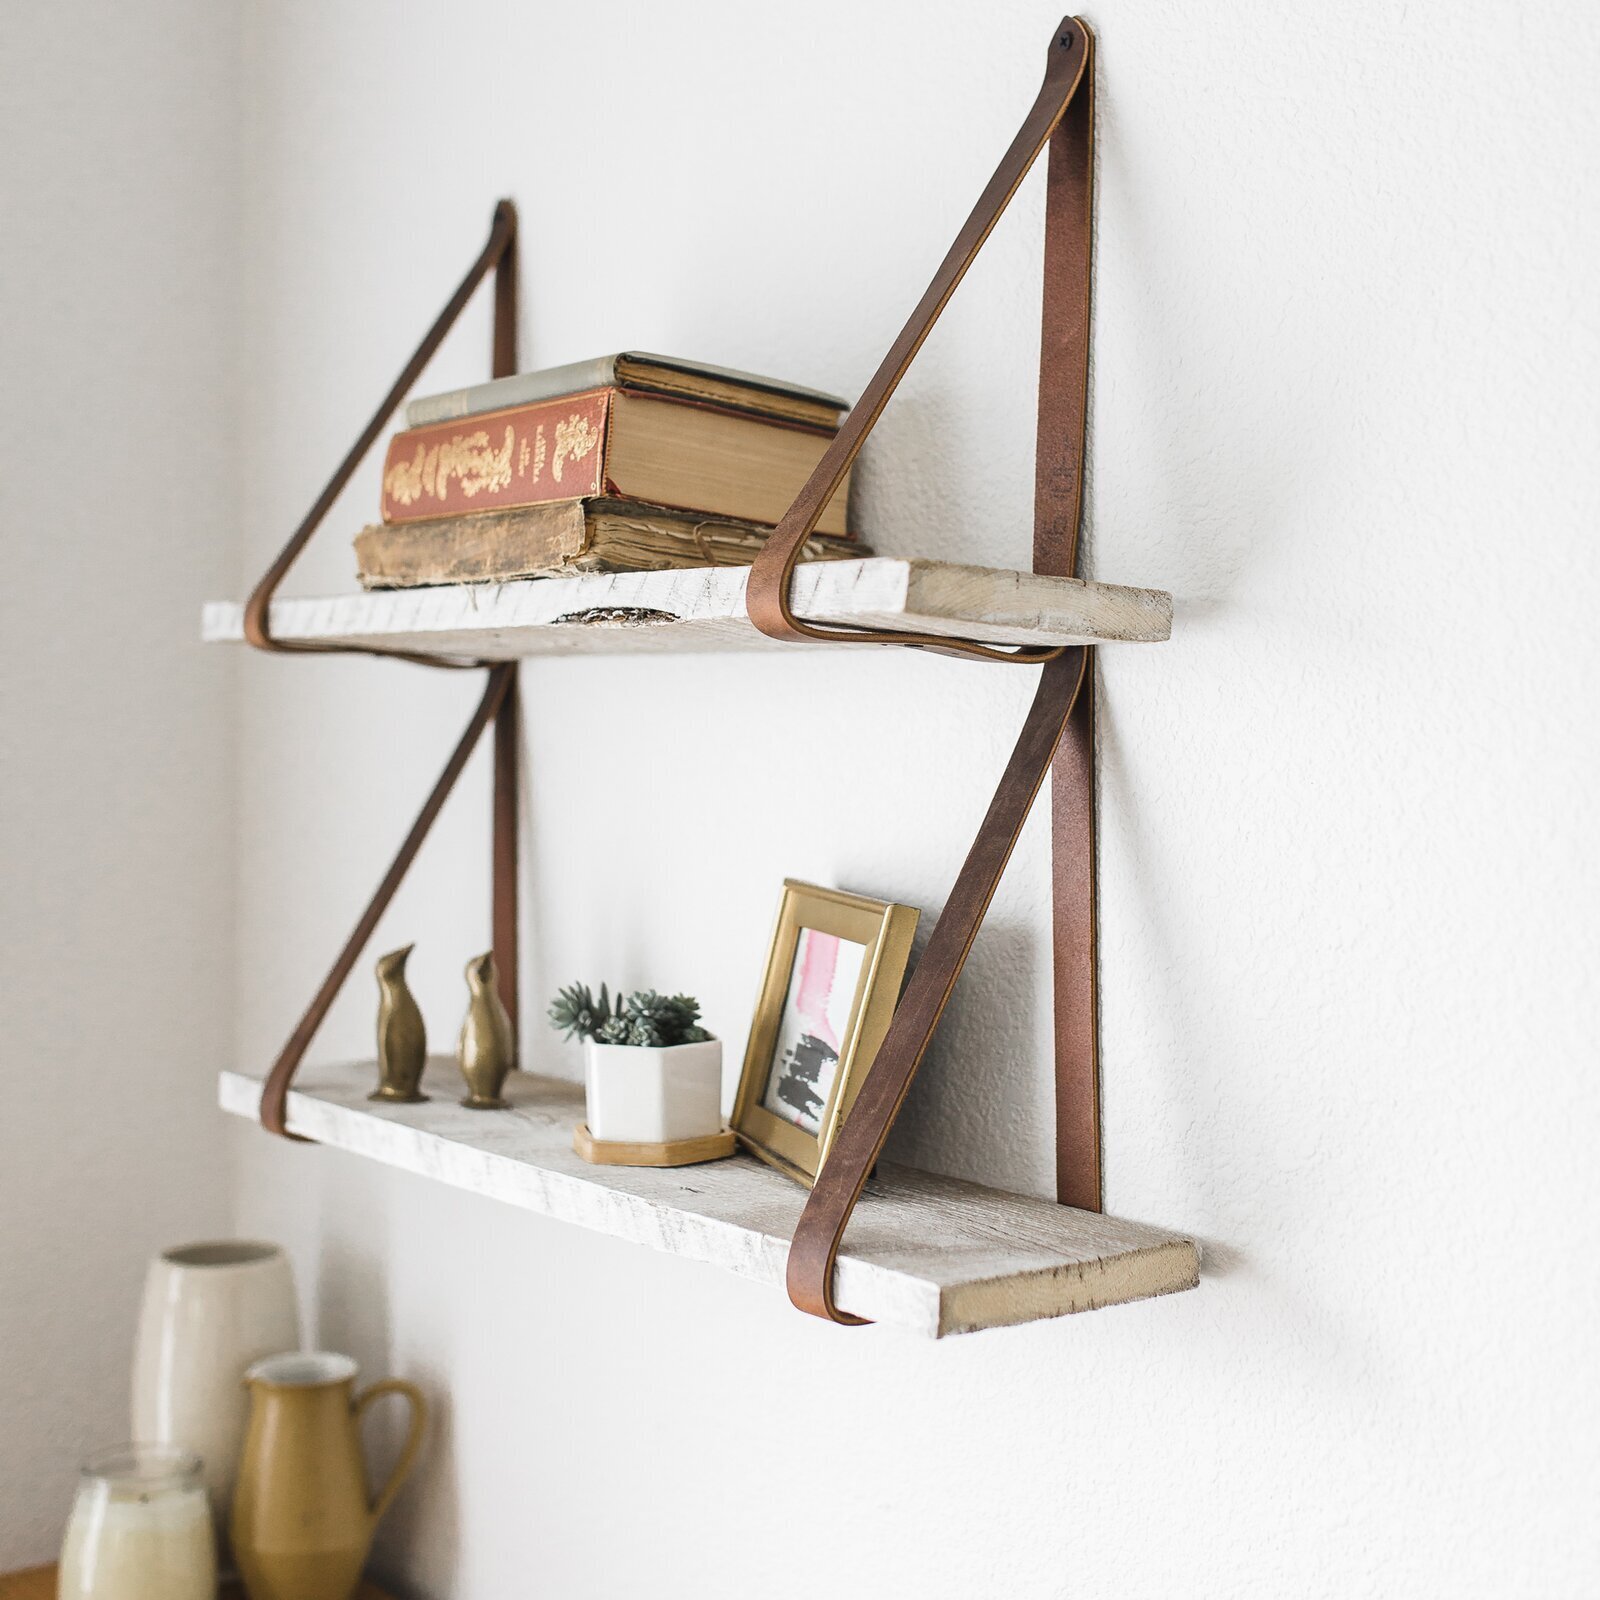 Distressed Wood Display Shelves with Leather Straps